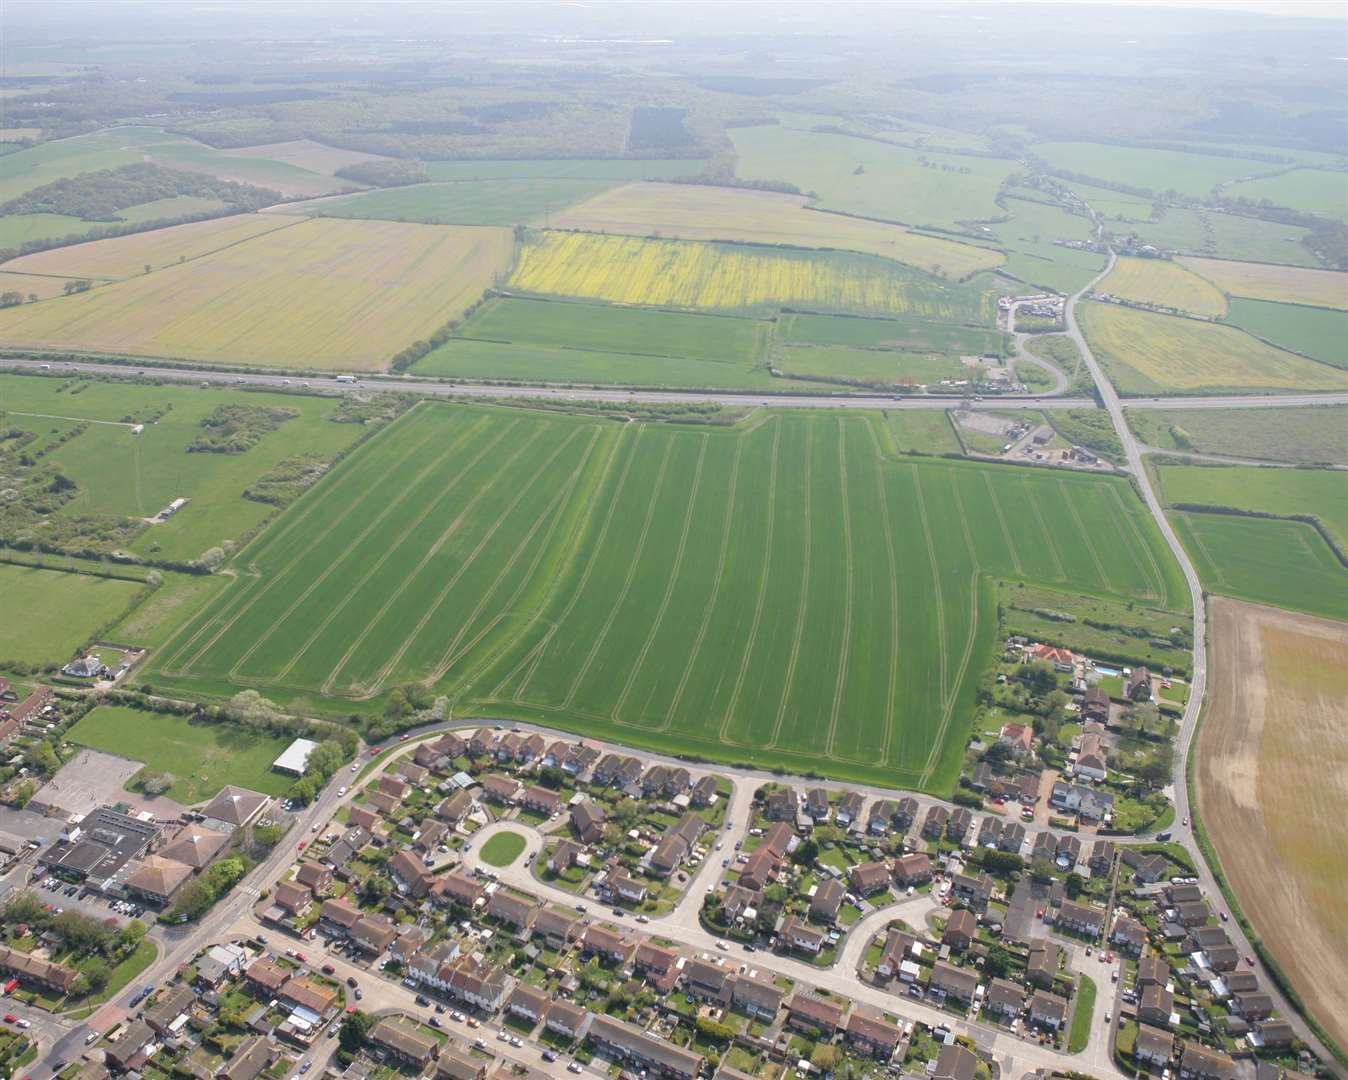 The estate will built on land off Greenhill Road on the outskirts of Herne Bay